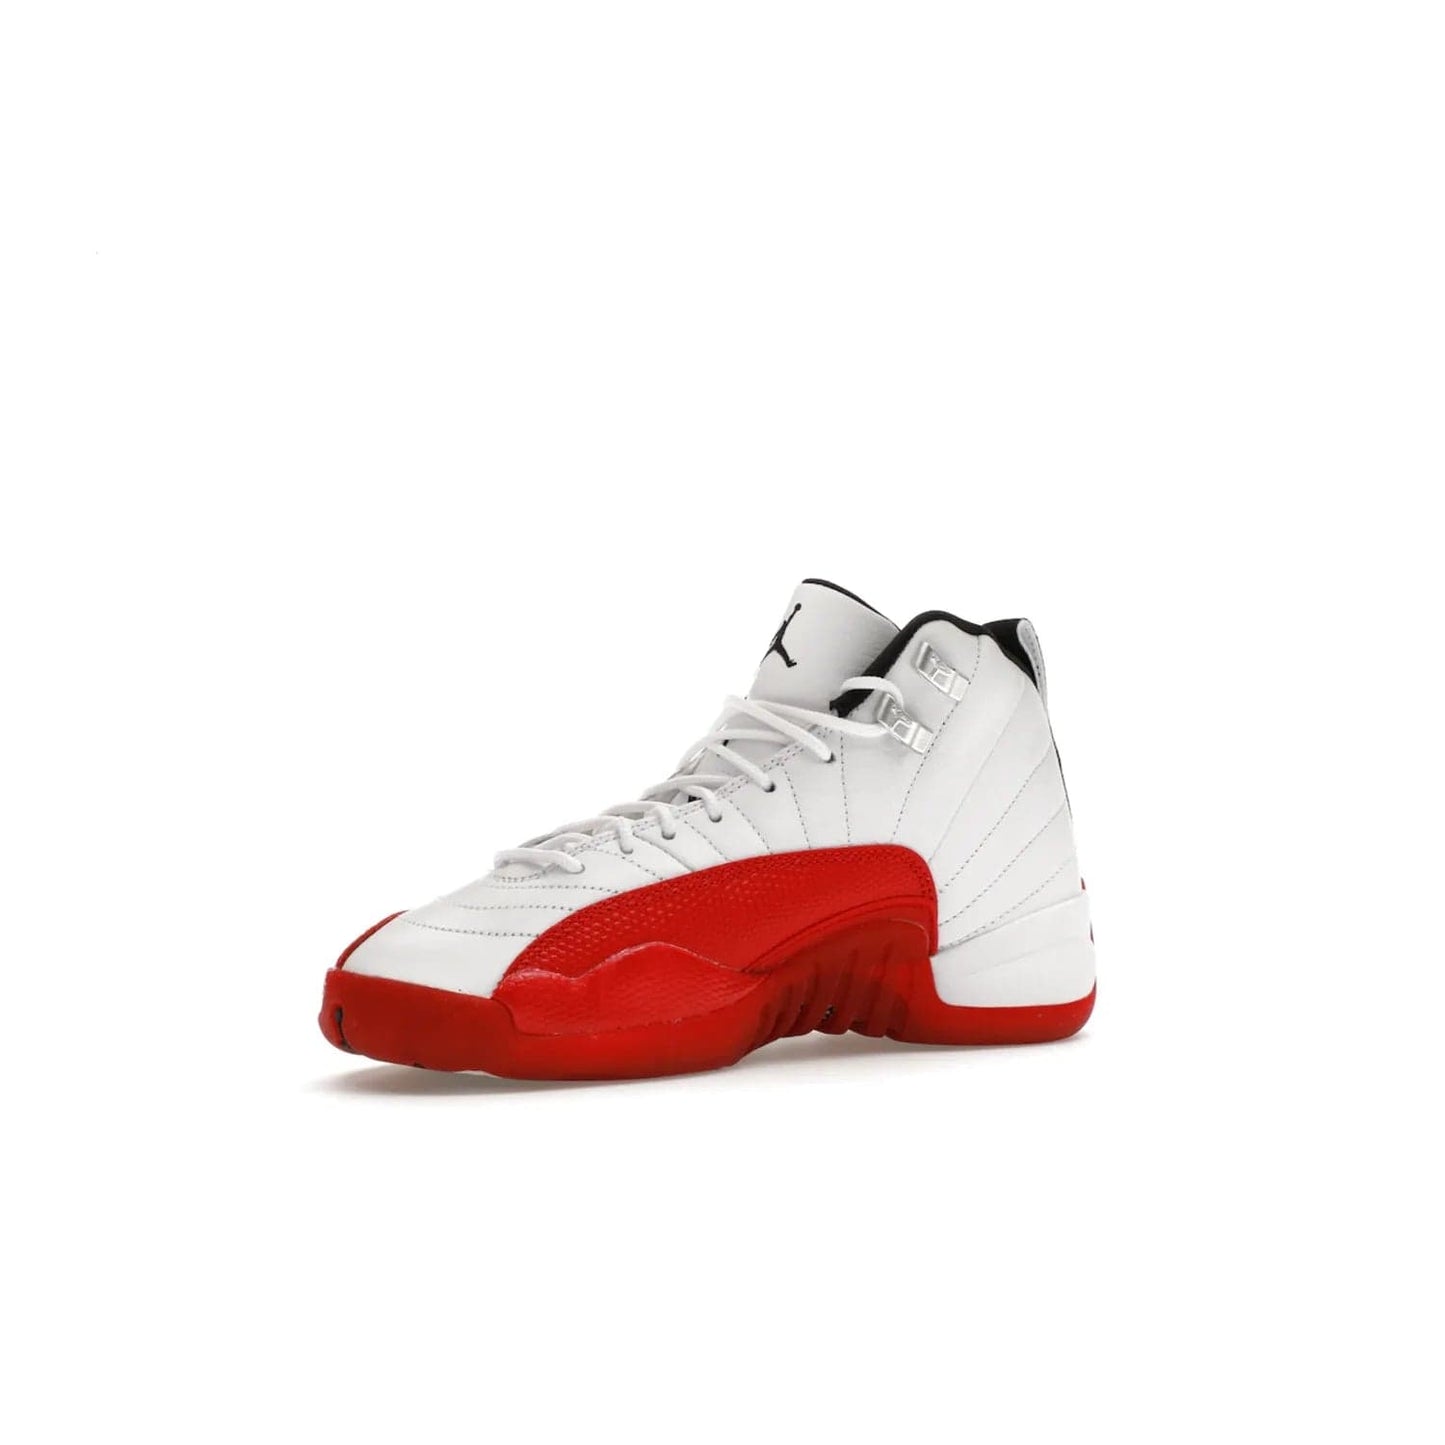 Jordan 12 Retro Cherry (2023) (GS) - Image 16 - Only at www.BallersClubKickz.com - Grab the Jordan 12 Retro Cherry (2023) (GS) and show off your signature style with these iconic kicks. Dressed in White, Black and Varsity Red, these timeless kicks are sure to turn heads. Available October 28, 2023.